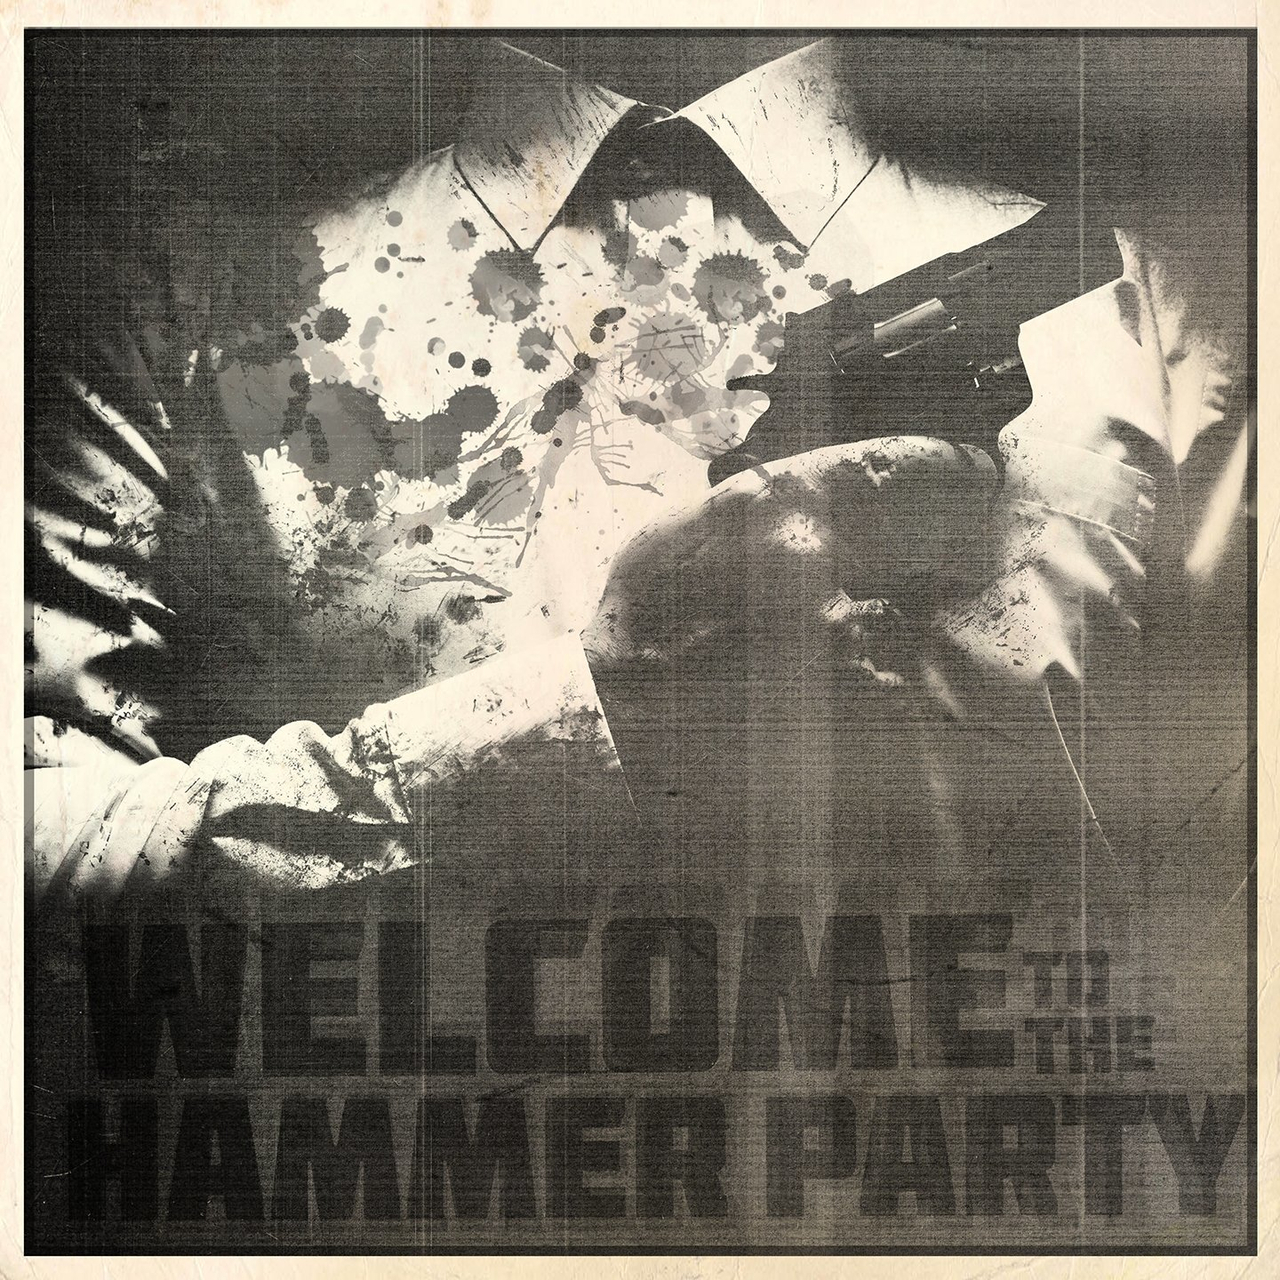 Welcome to the Hammer Party